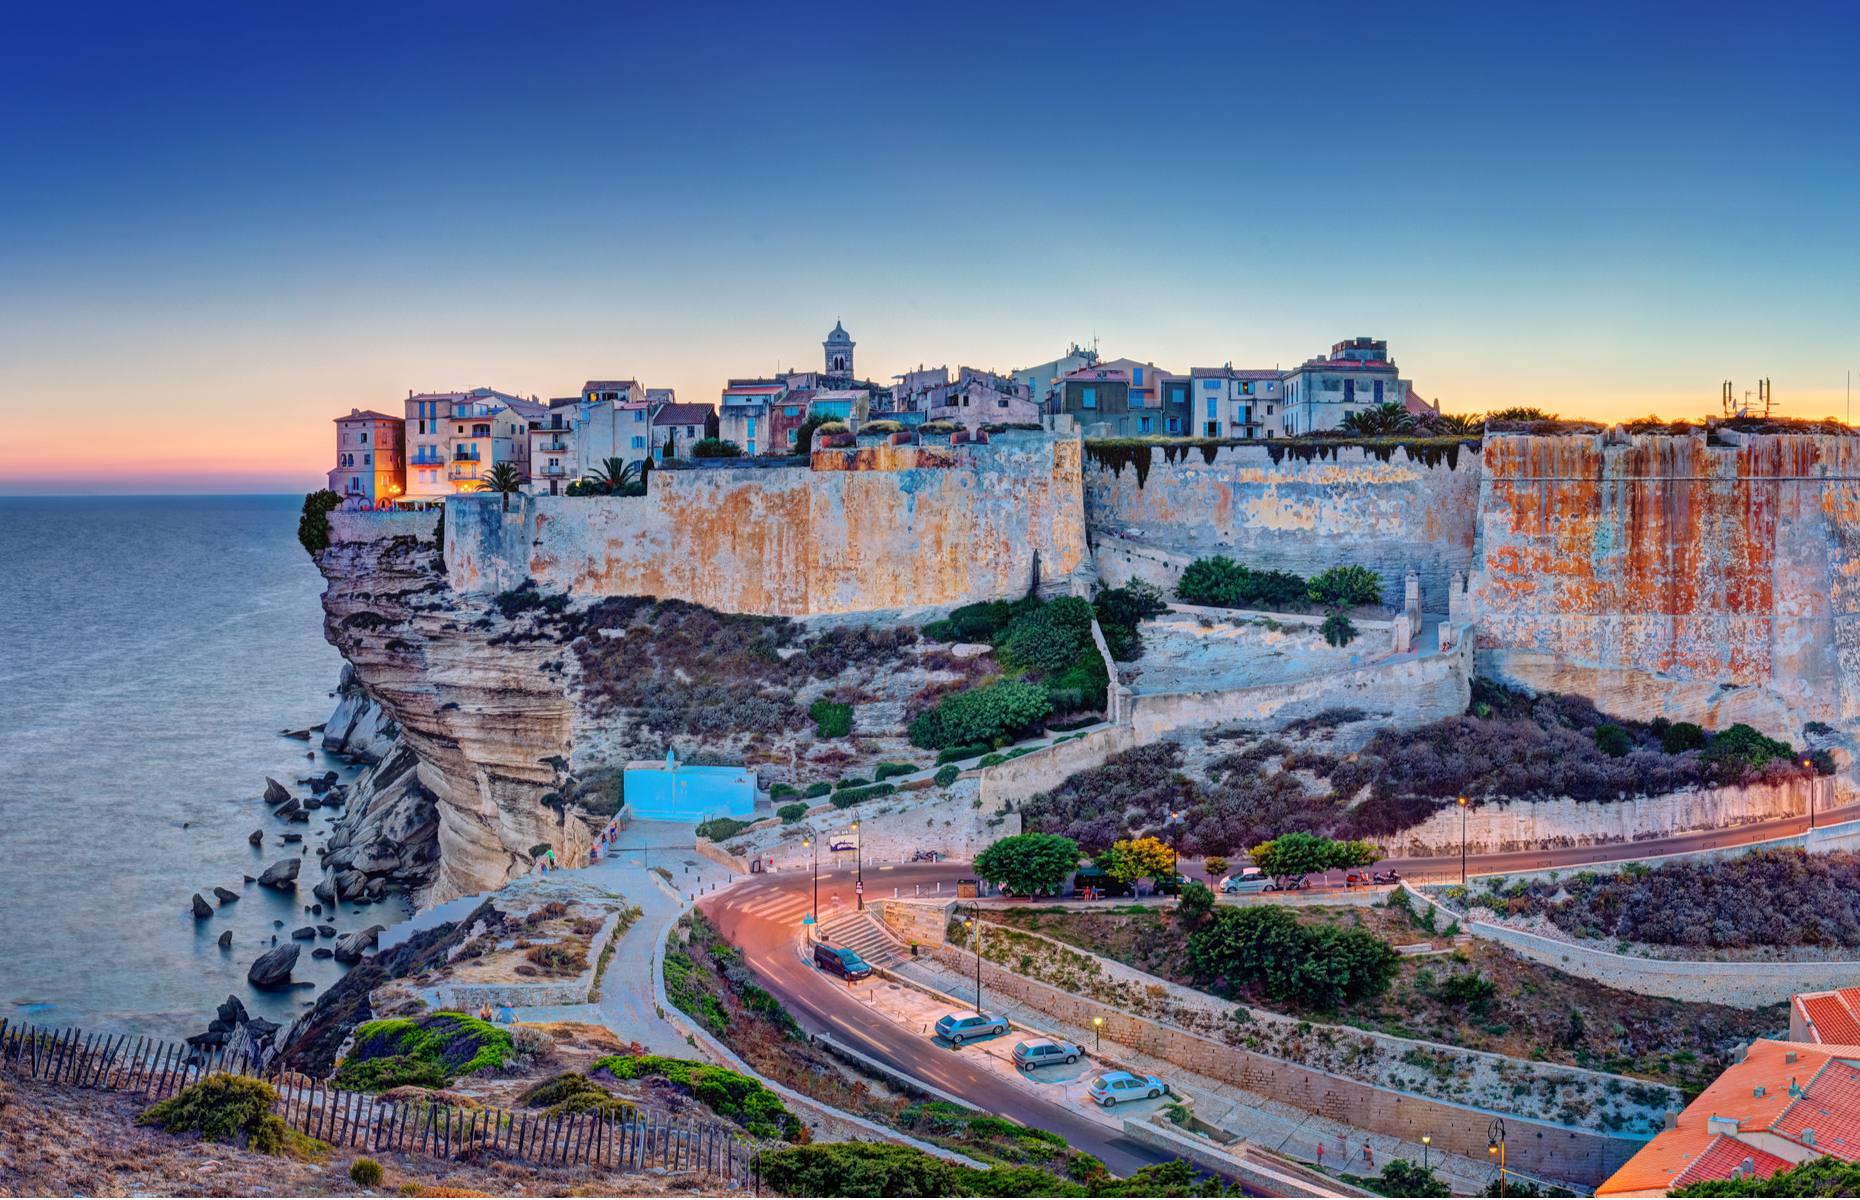 <p>With its precarious position on top of a narrow limestone plateau, Bonifacio looks especially spellbinding by nightfall, when its buildings are illuminated by polychromatic lights. Located on Corsica’s southernmost tip, the settlement was established in about AD 828 by Count Boniface of Tuscany, and it became an important strategic location for defending Corsica against pirates. </p>  <p><strong><a href="https://www.loveexploring.com/gallerylist/100075/on-the-edge-the-worlds-most-perilous-places">Discover the world's most precarious places</a></strong></p>